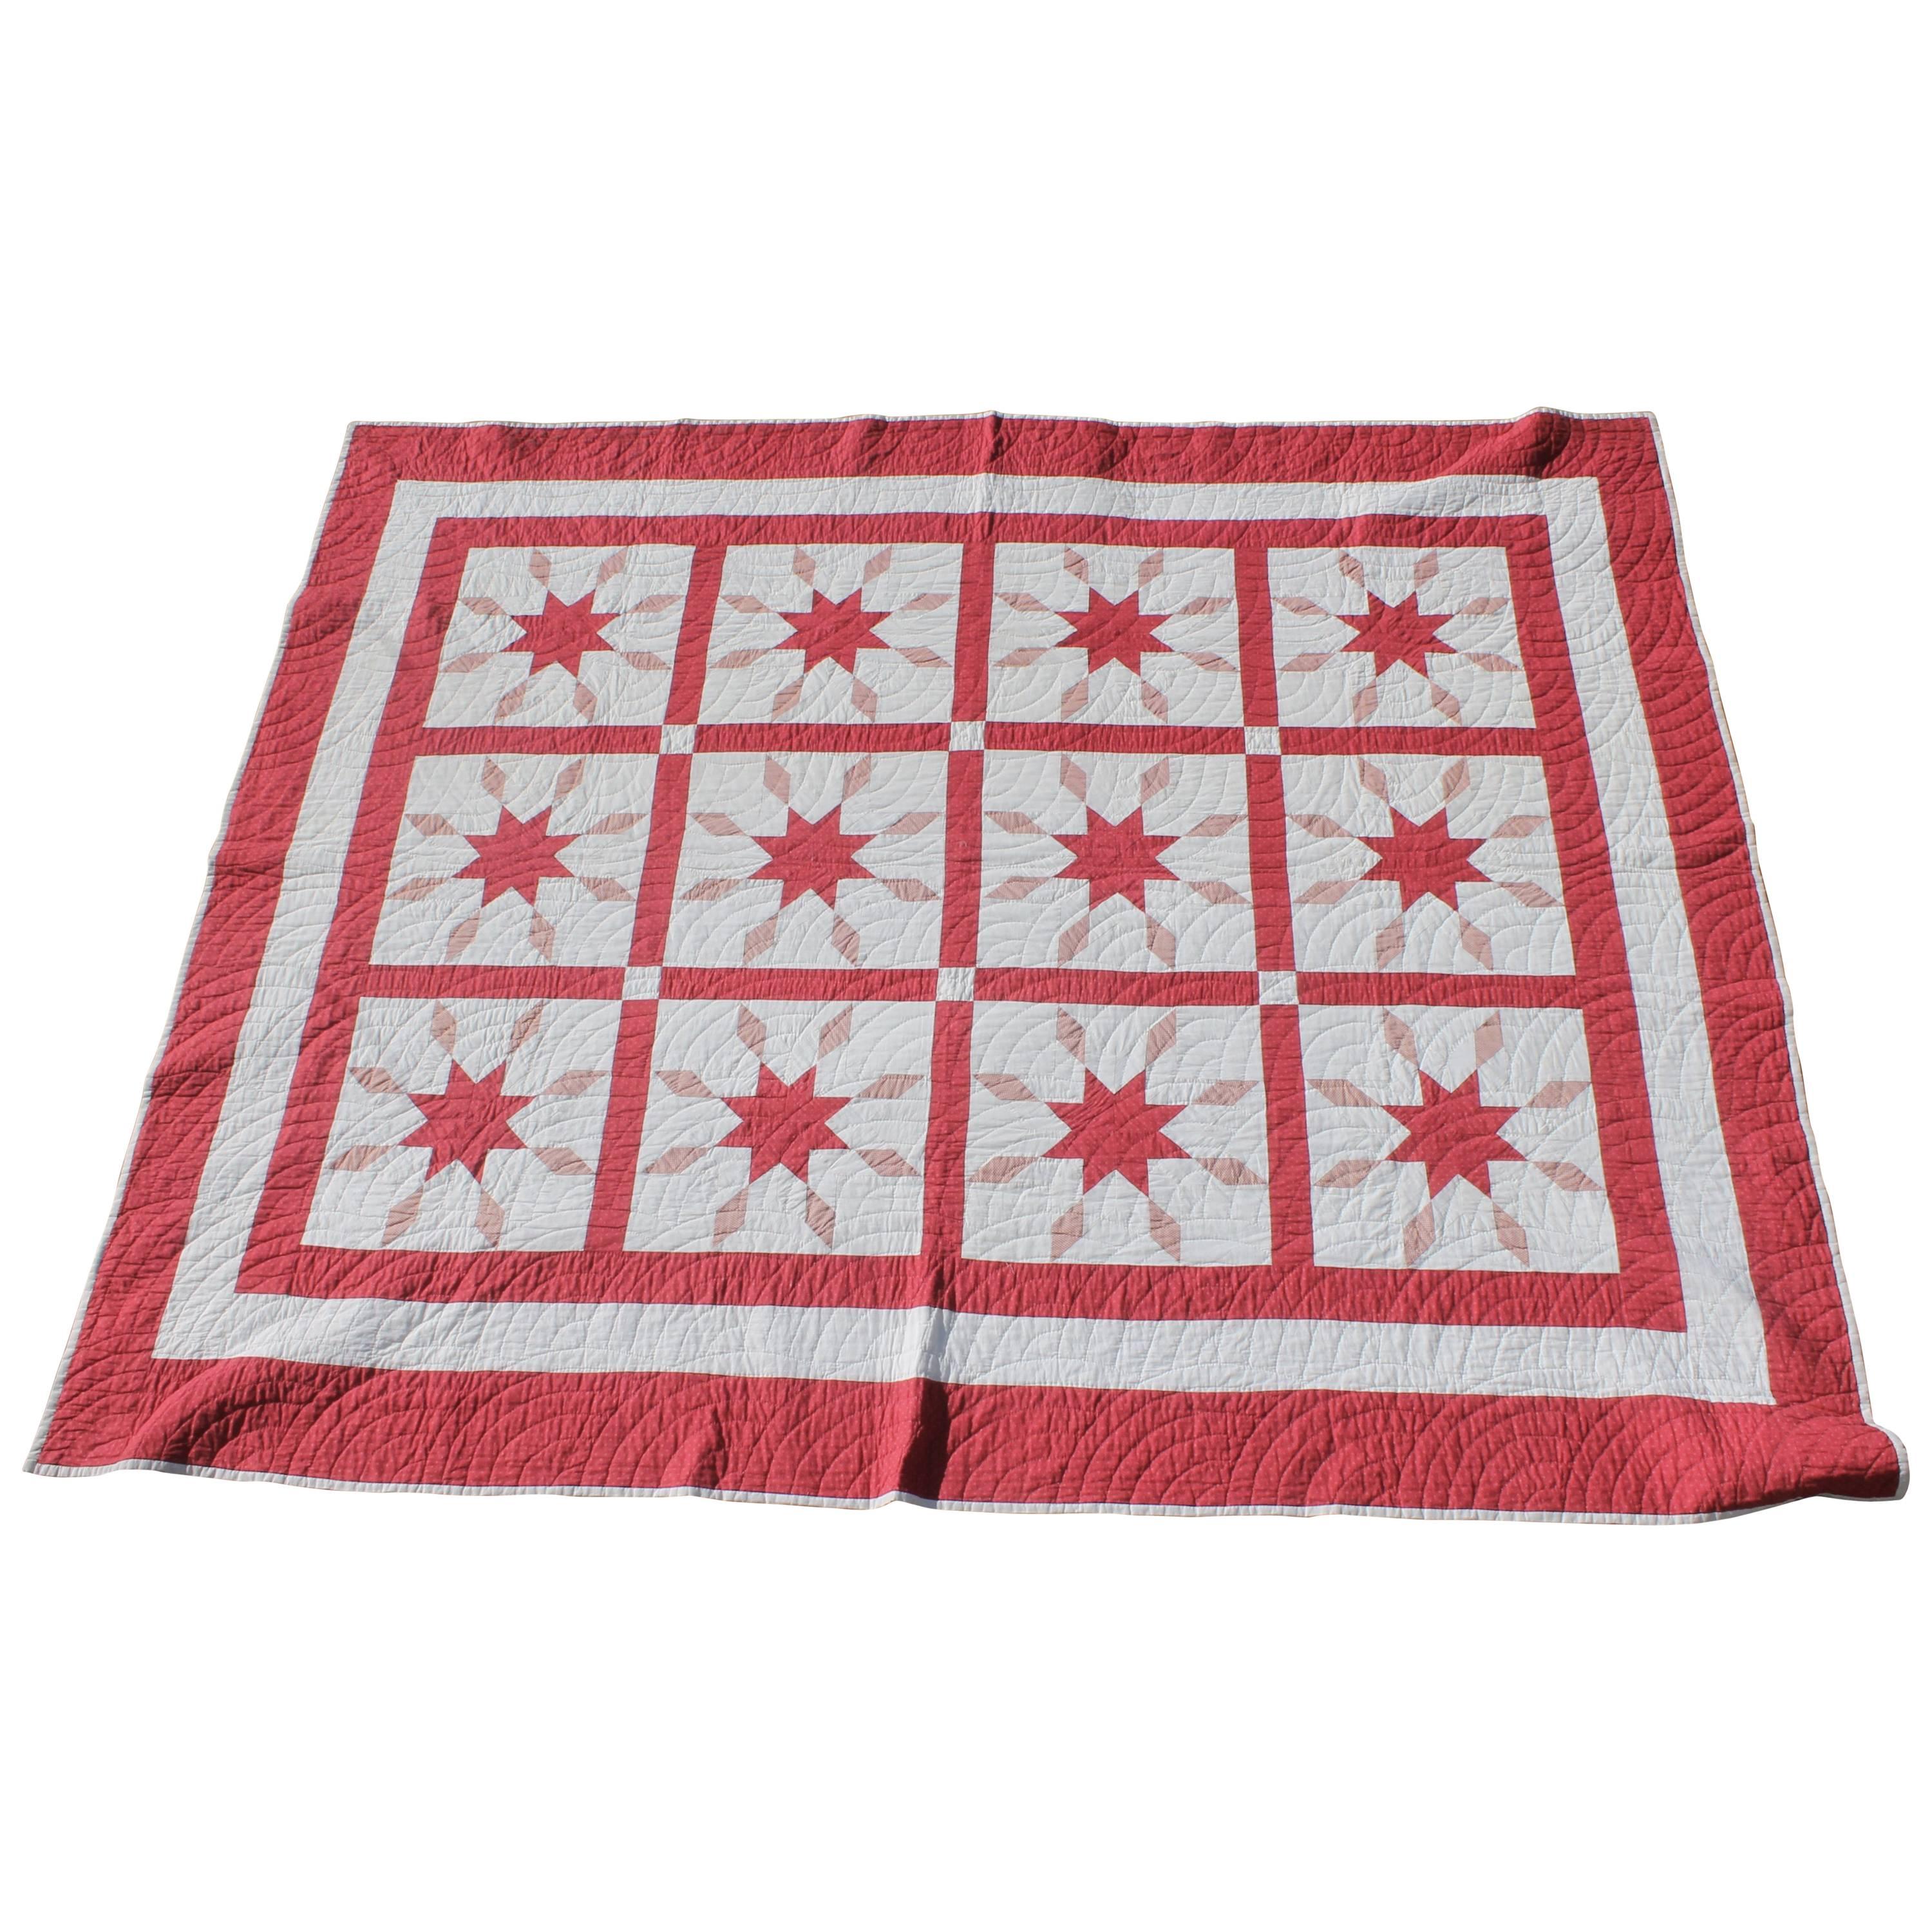 Amazing Red and White Geometric Star Quilt